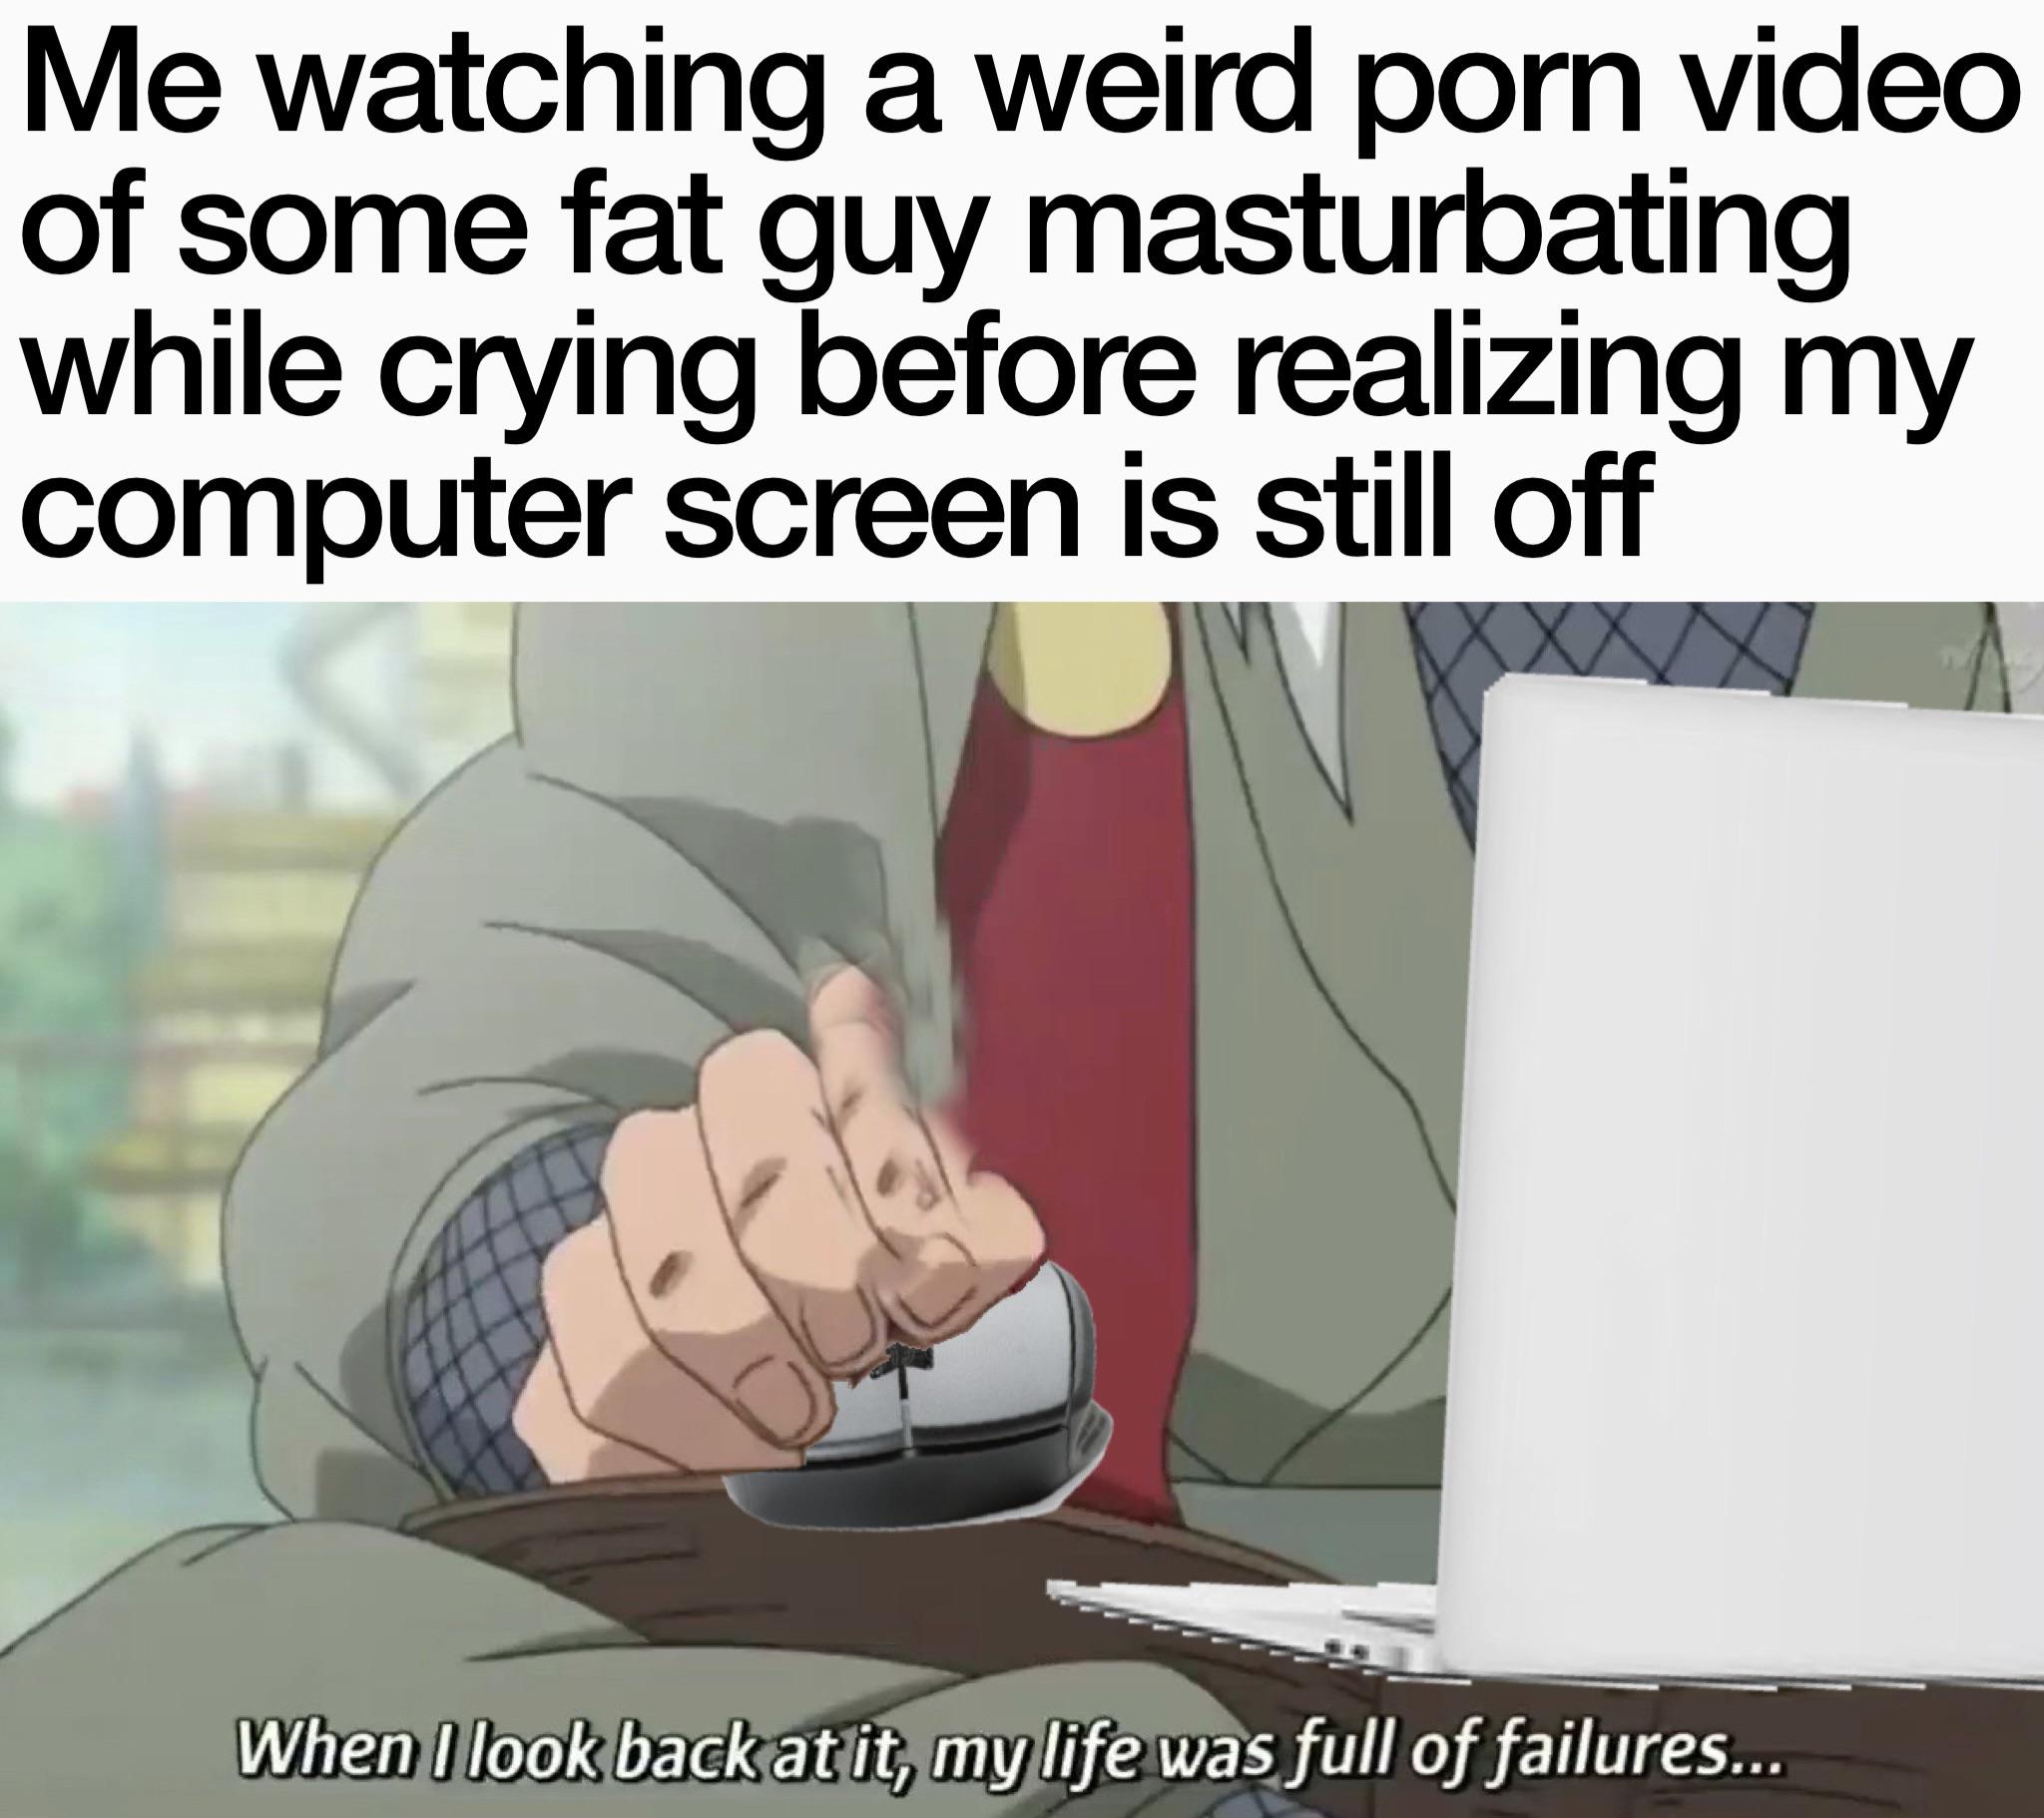 dank memes - funny memes - cartoon - Me watching a weird porn video of some fat guy masturbating while crying before realizing my computer screen is still off When I look back at it, my life was full of failures...